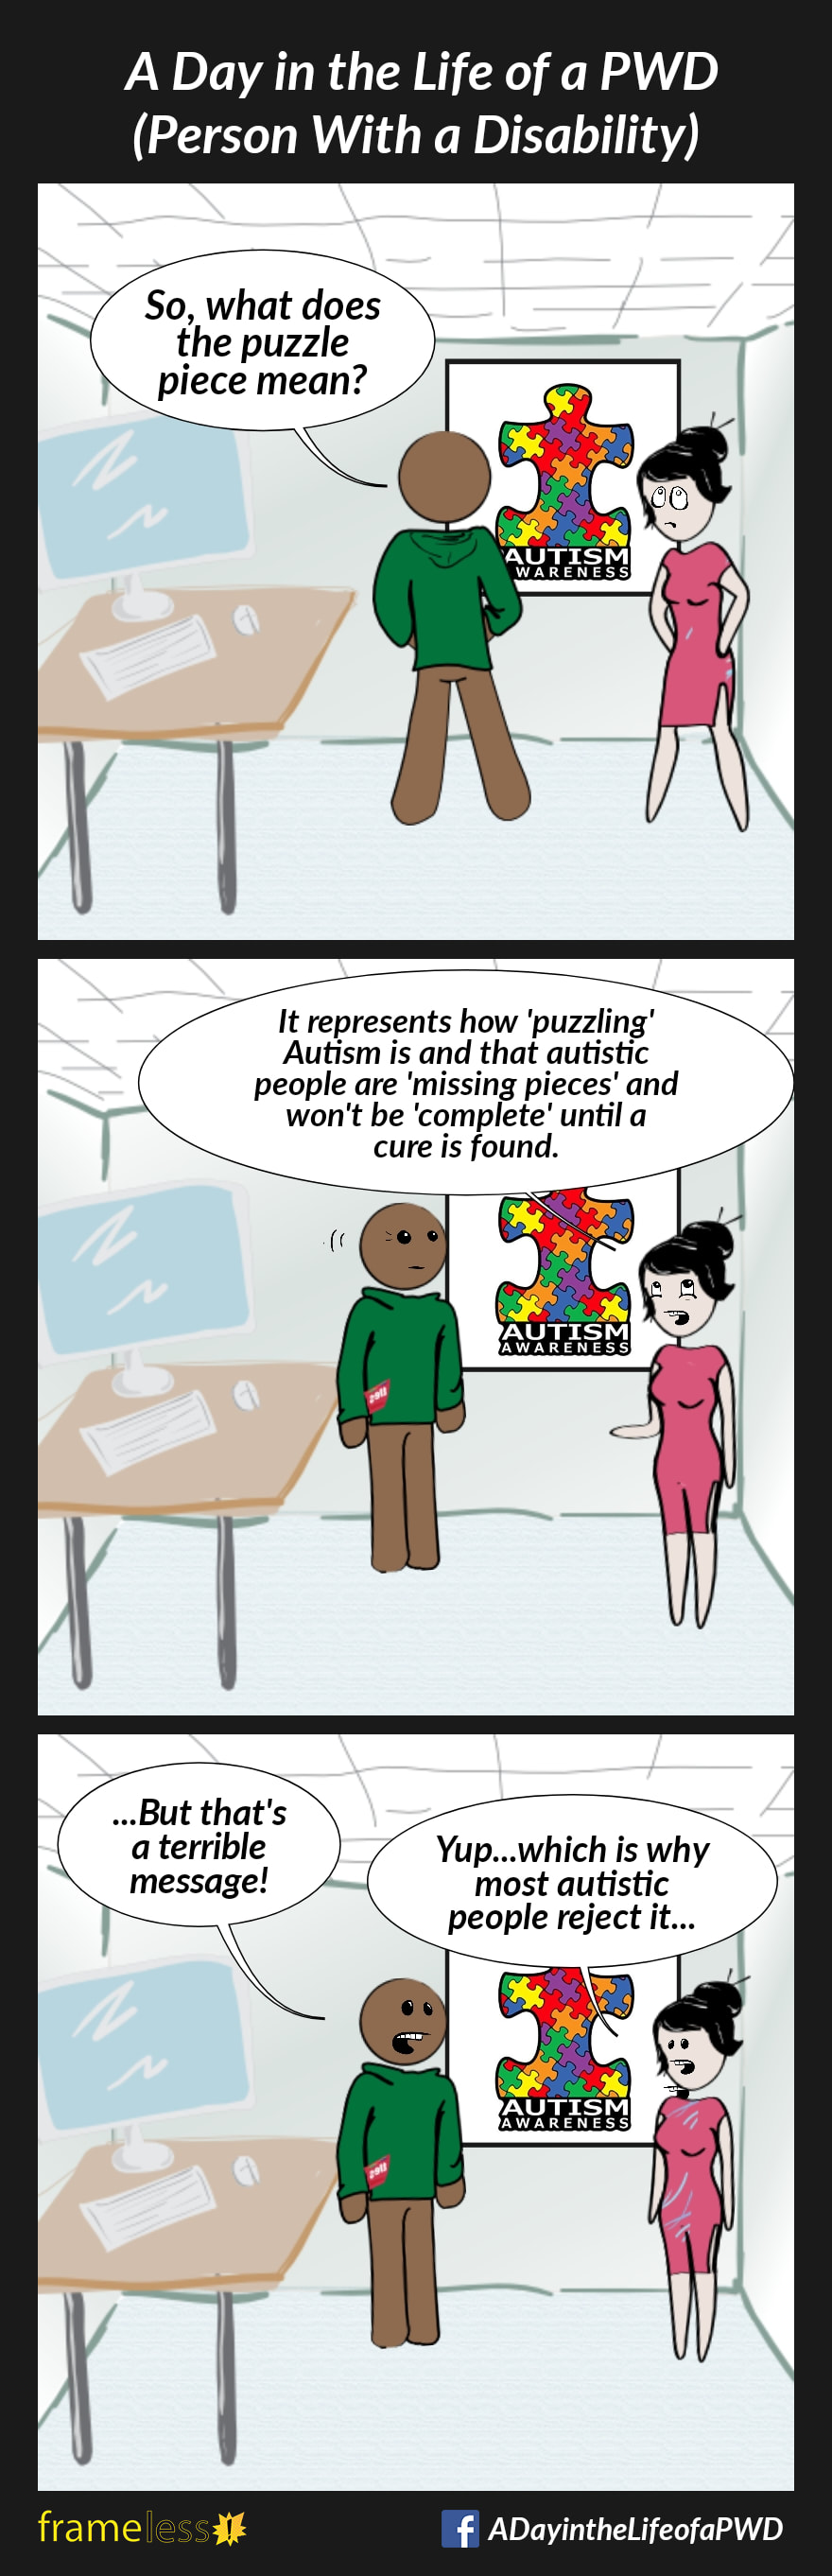 COMIC STRIP 
A Day in the Life of a PWD (Person With a Disability) 

Frame 1:
A man and a woman are in a classroom. The man is looking at an Autism Awareness poster with a giant multi-colored puzzle piece on it.
MAN: So, what does the puzzle piece mean?
The woman rolls her eyes.

Frame 2:
WOMAN: It represents how 'puzzling' Autism is and that autustic people are 'missing pieces' and won't be 'complete' until a cure is found.

Frame 3:
MAN: ...But that's a terrible message!
WOMAN: Yup...which is why most autustic people reject it